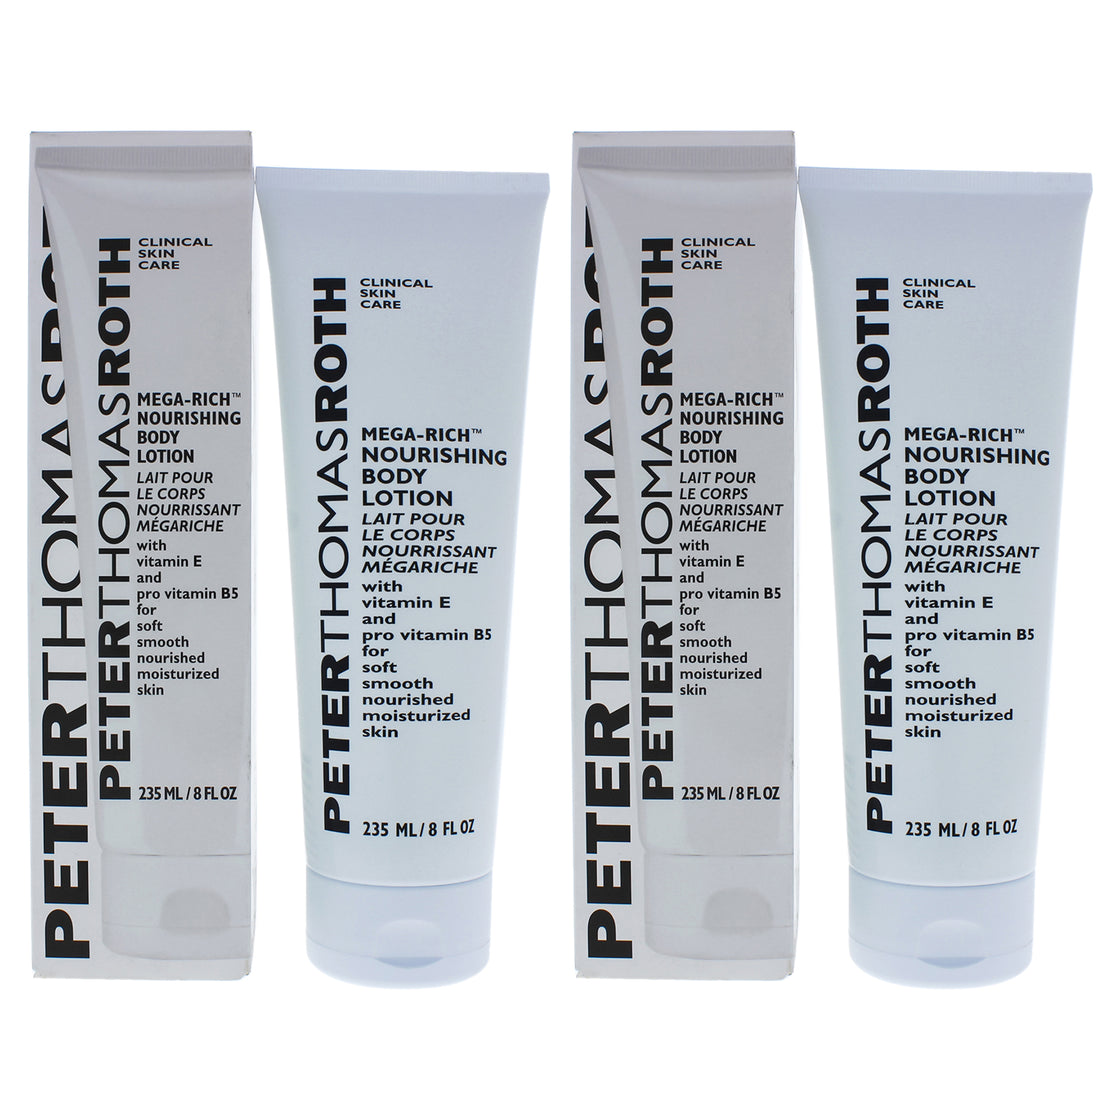 Mega-Rich Body Lotion by Peter Thomas Roth for Unisex - 8 oz Body Lotion - Pack of 2